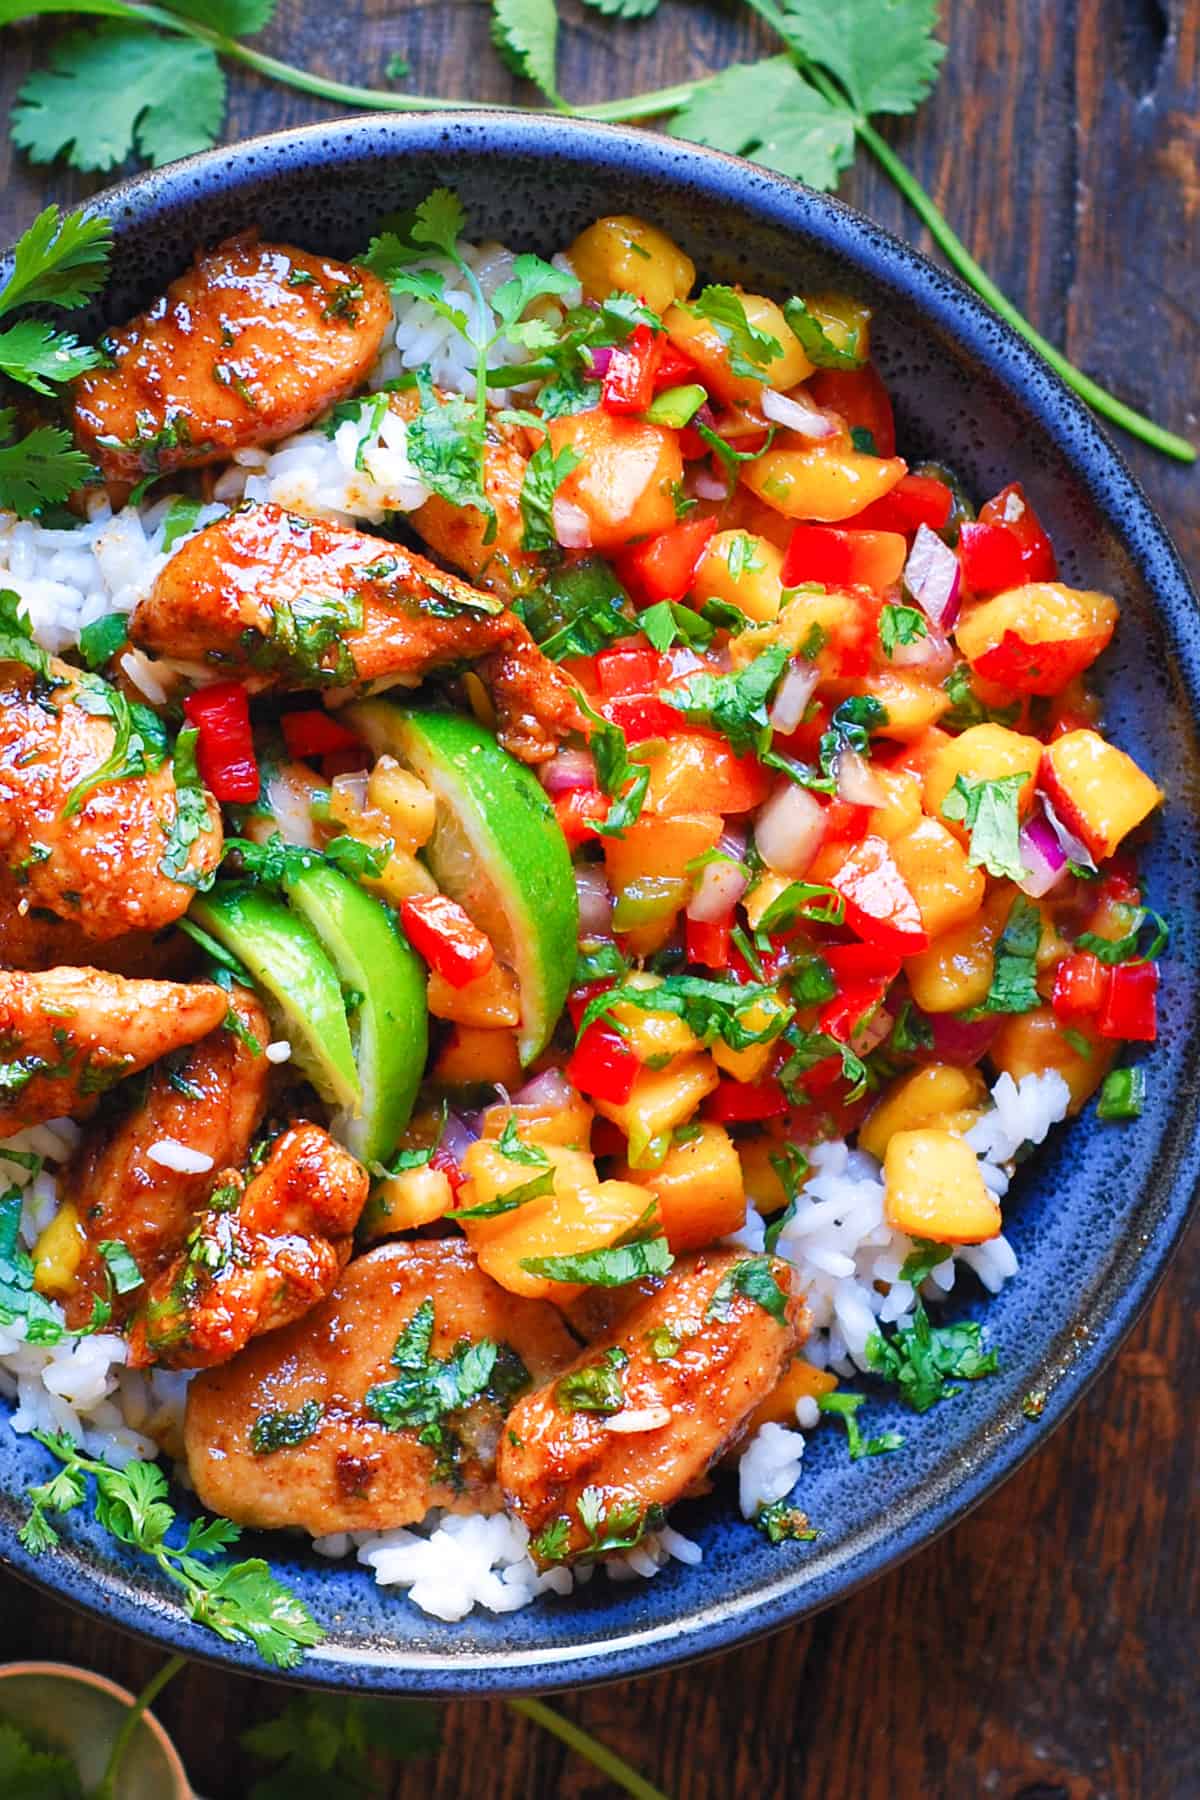 Cilantro-Lime Chicken Bowls with Peach Salsa and Rice in a blue bowl